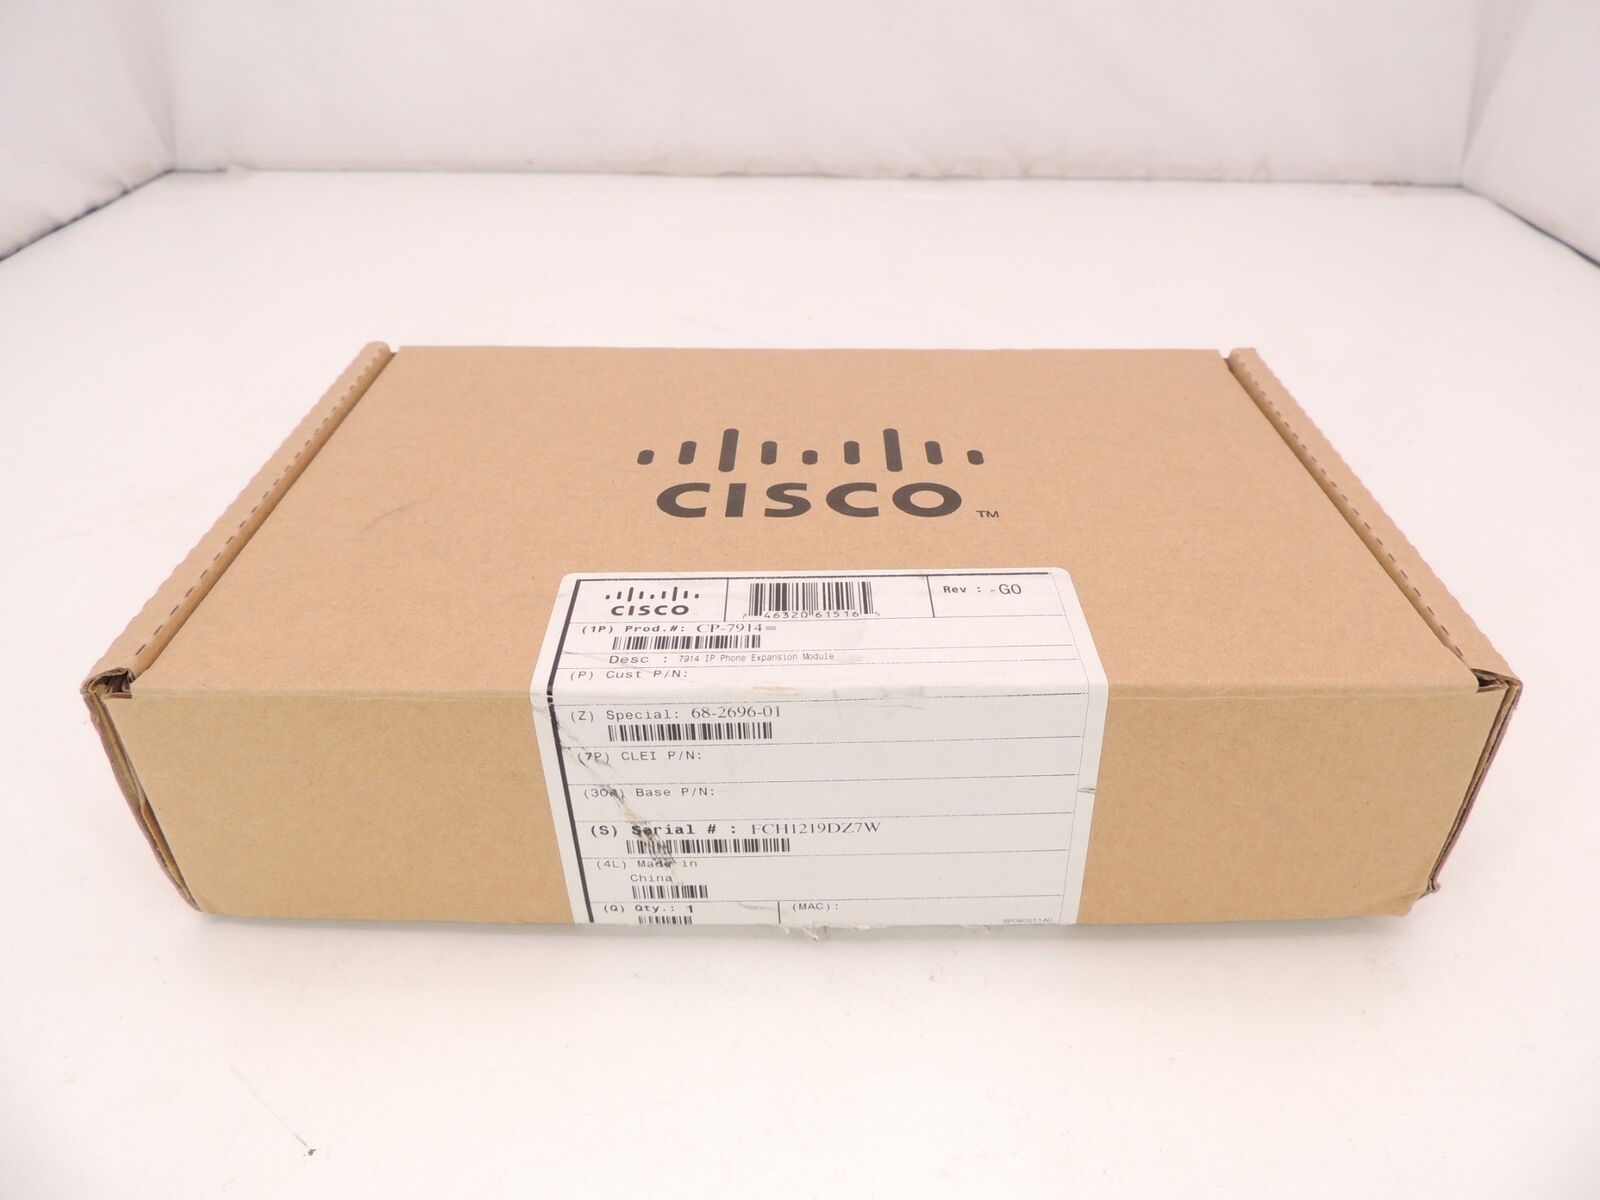 New Unused Cisco 7914 CP-7914 Unified IP Phone Expansion Module 68-2696-01